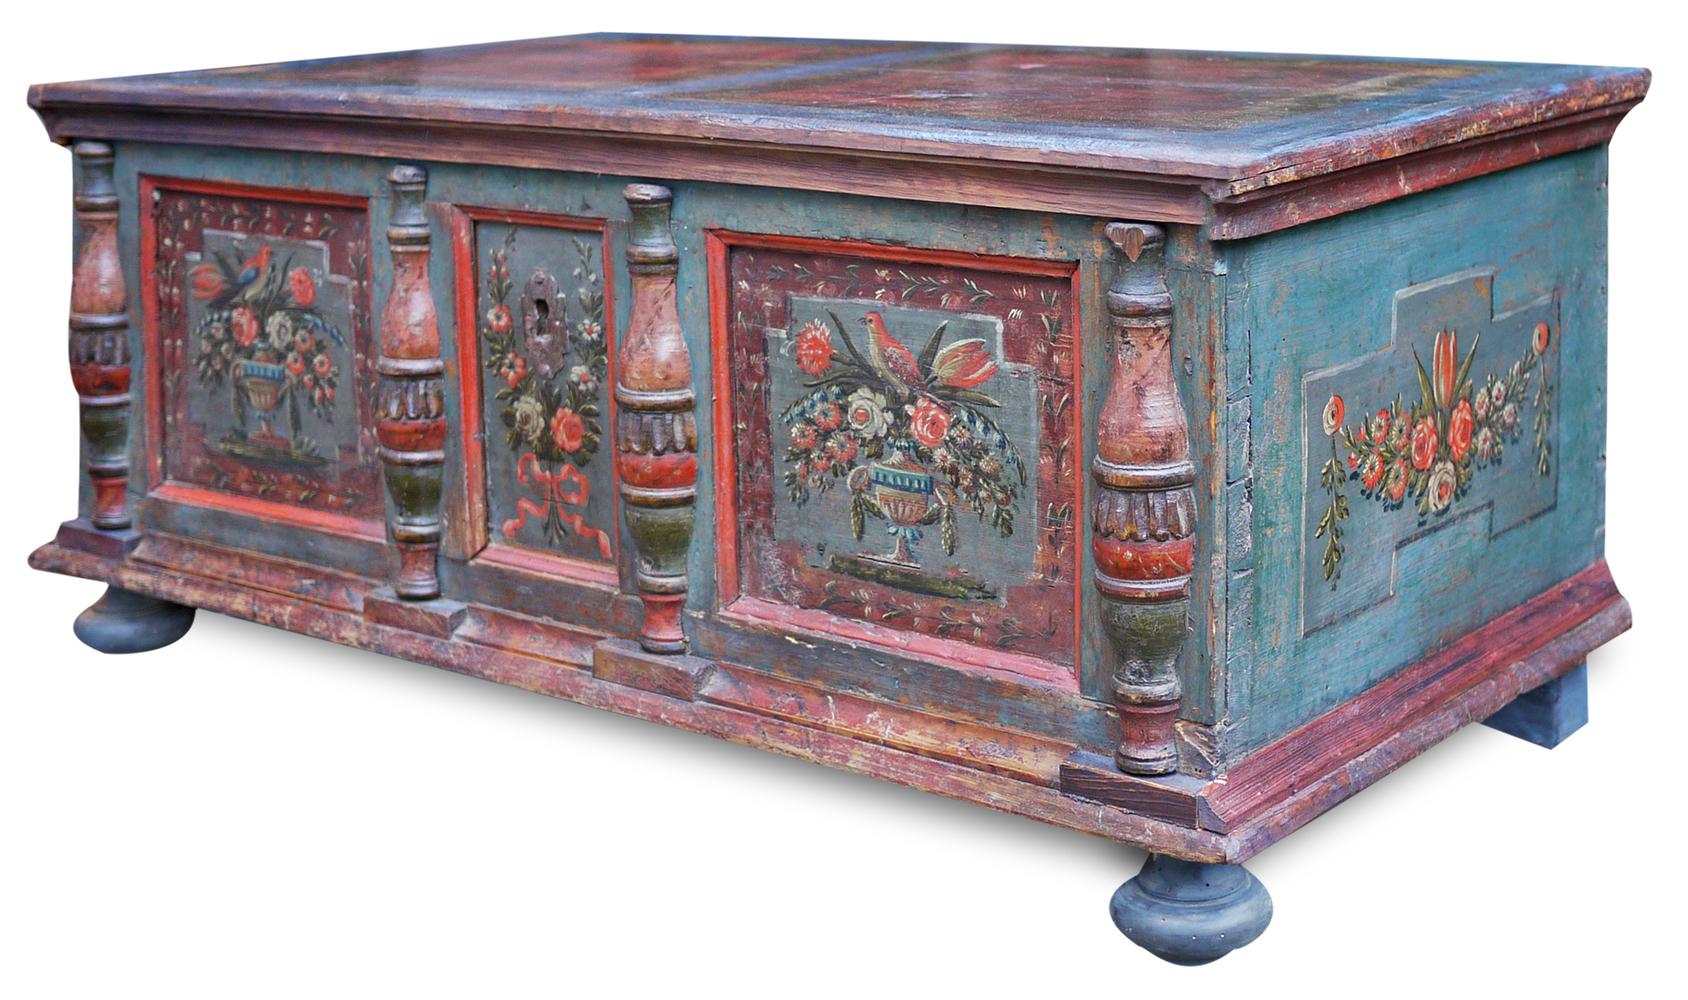 Painted alpine blanket chest

Measures (in cm)
H. 49, L. 117, P. 58

Antique painted chest.
Entirely painted in blue, on the front it has three mirrors with floral decorations and two colorful birds. On the sides we again find frames with